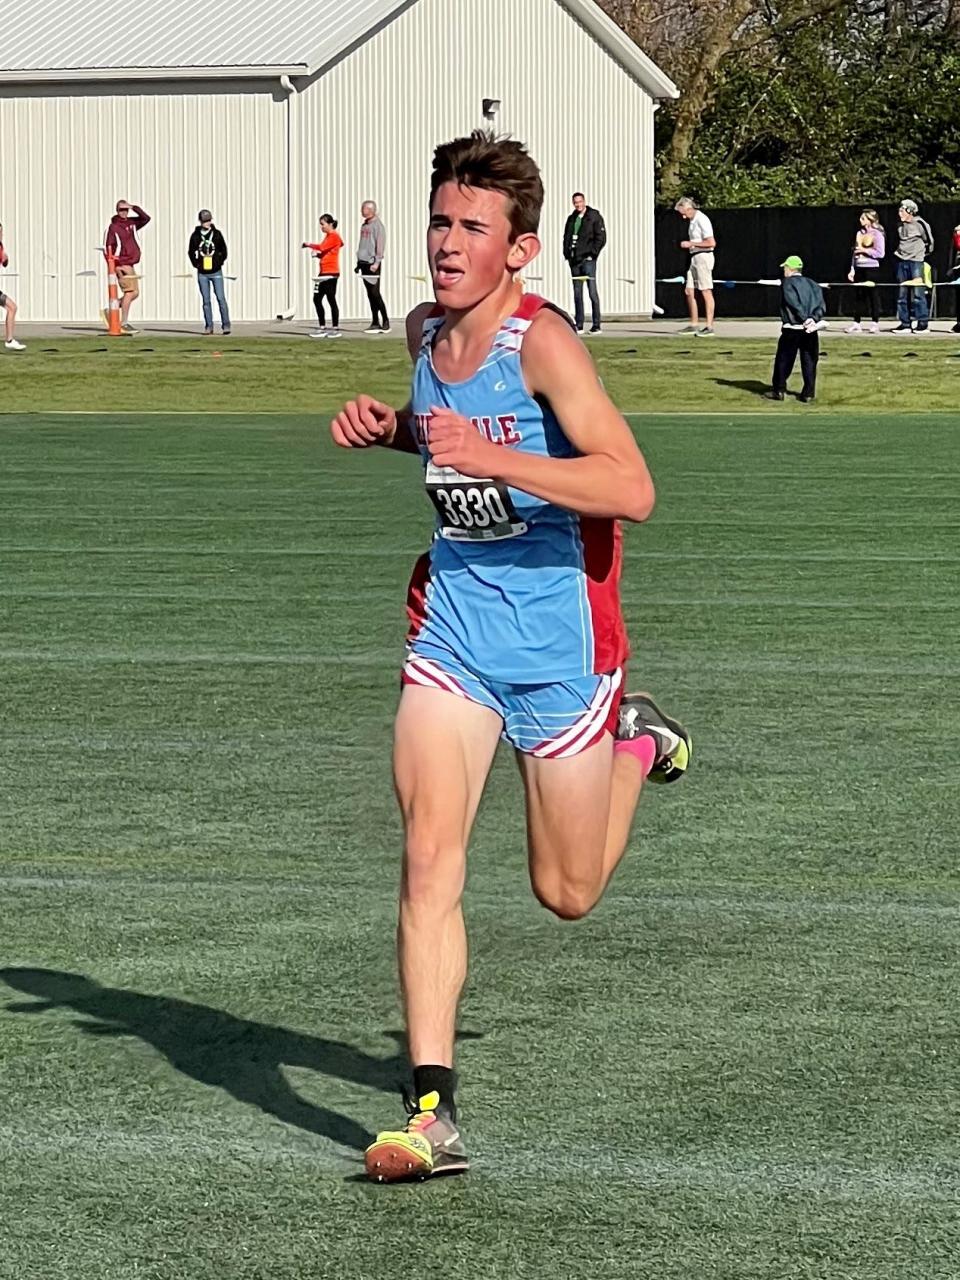 Ridgedale's Brogan Weston runs at the Division III boys cross country state championships this fall at Fortress Obetz. He was named Fahey Bank Athlete of the Month for November among Marion County boys.